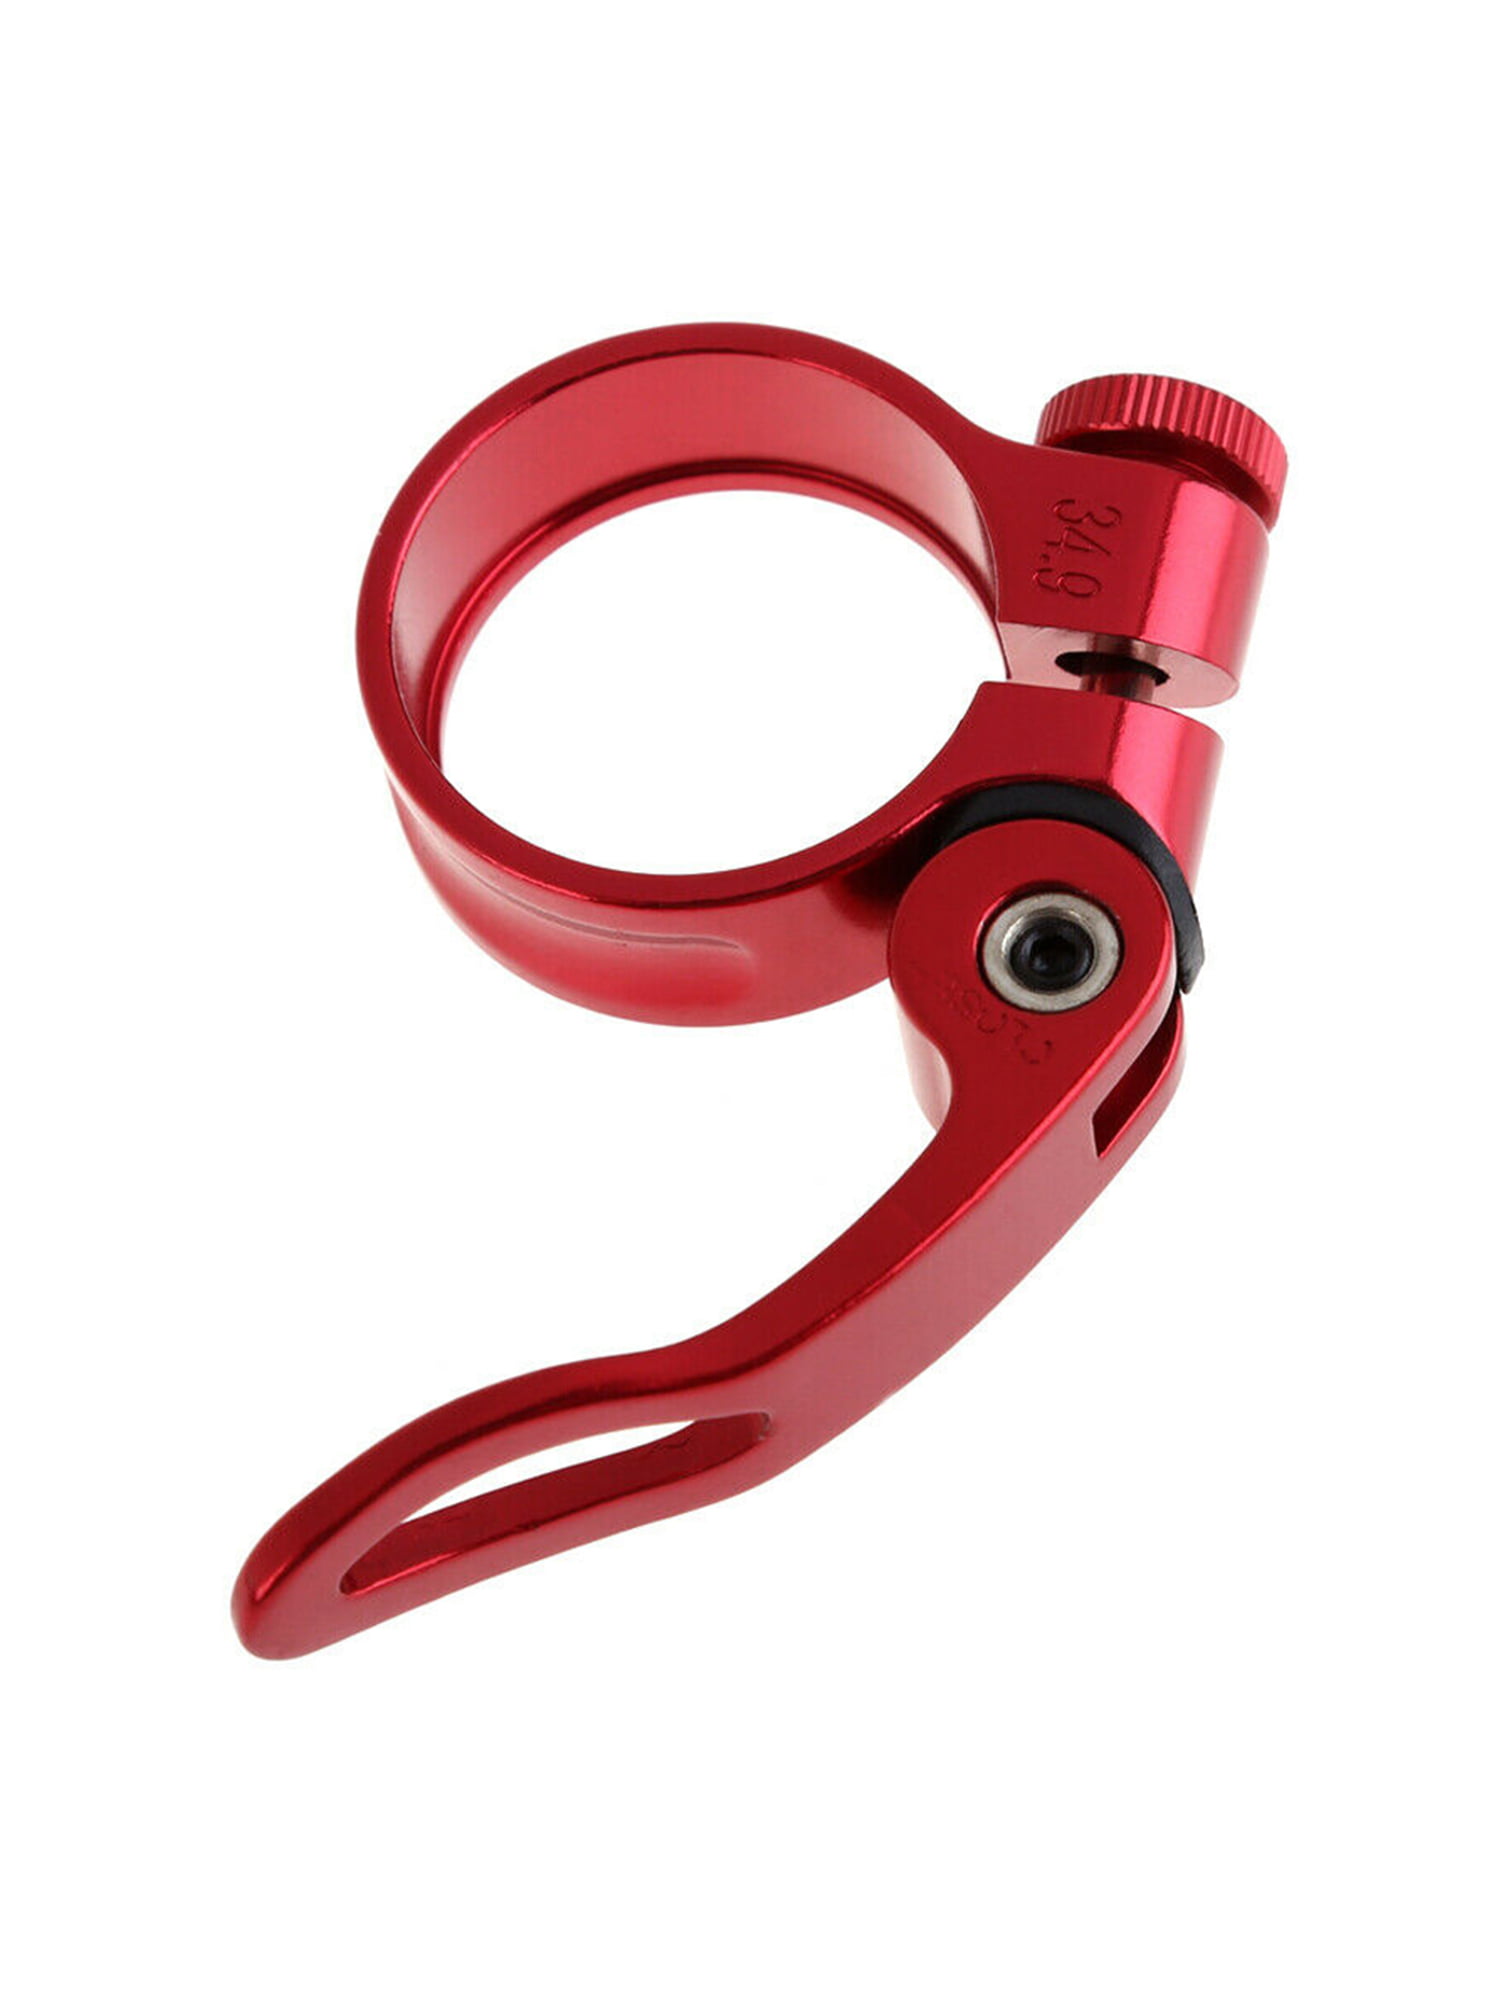 Bike Seatpost Clip Clamp Cycling Binder FOR 31.8/34.9/37MM Bicycle Seat Post 